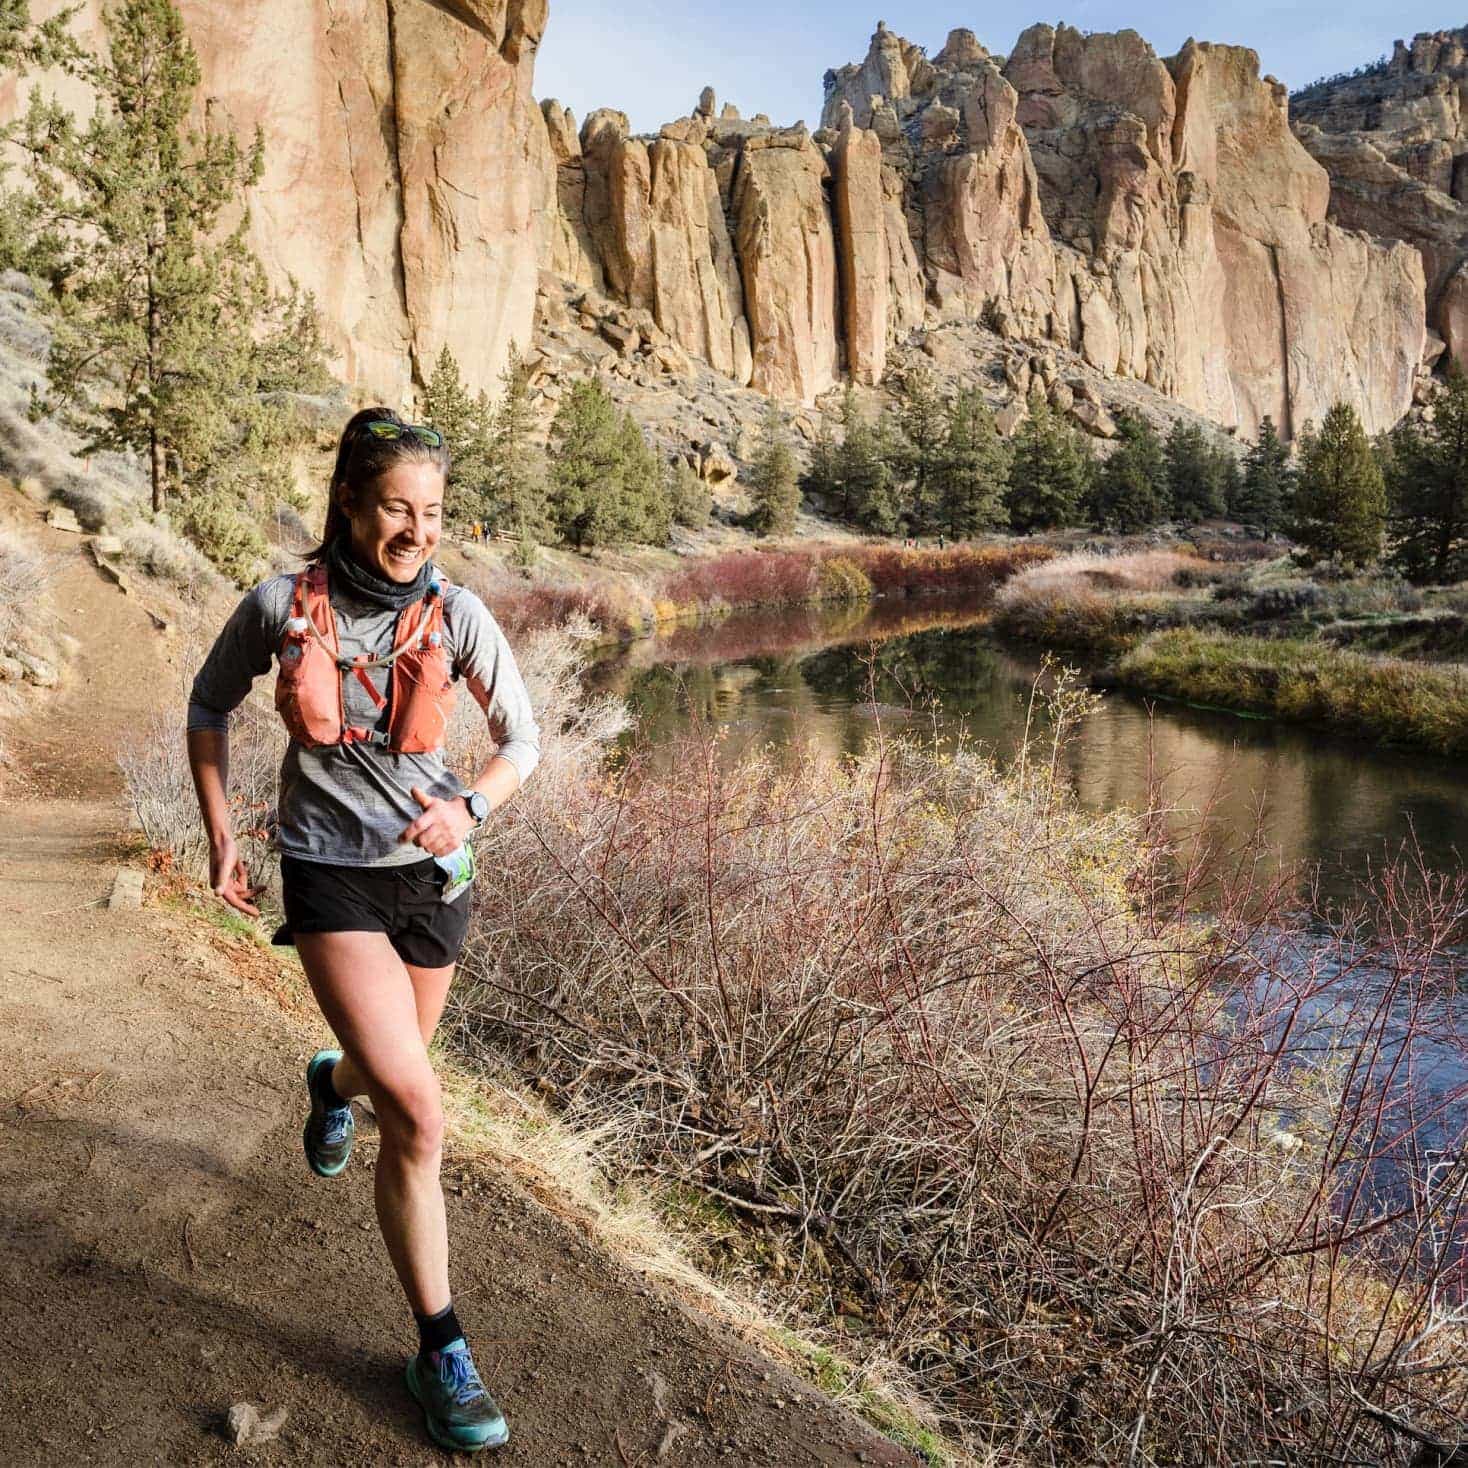 Laura MacCarley runs at Smith Rock near Bend, OR with a river and cliffs in the background.